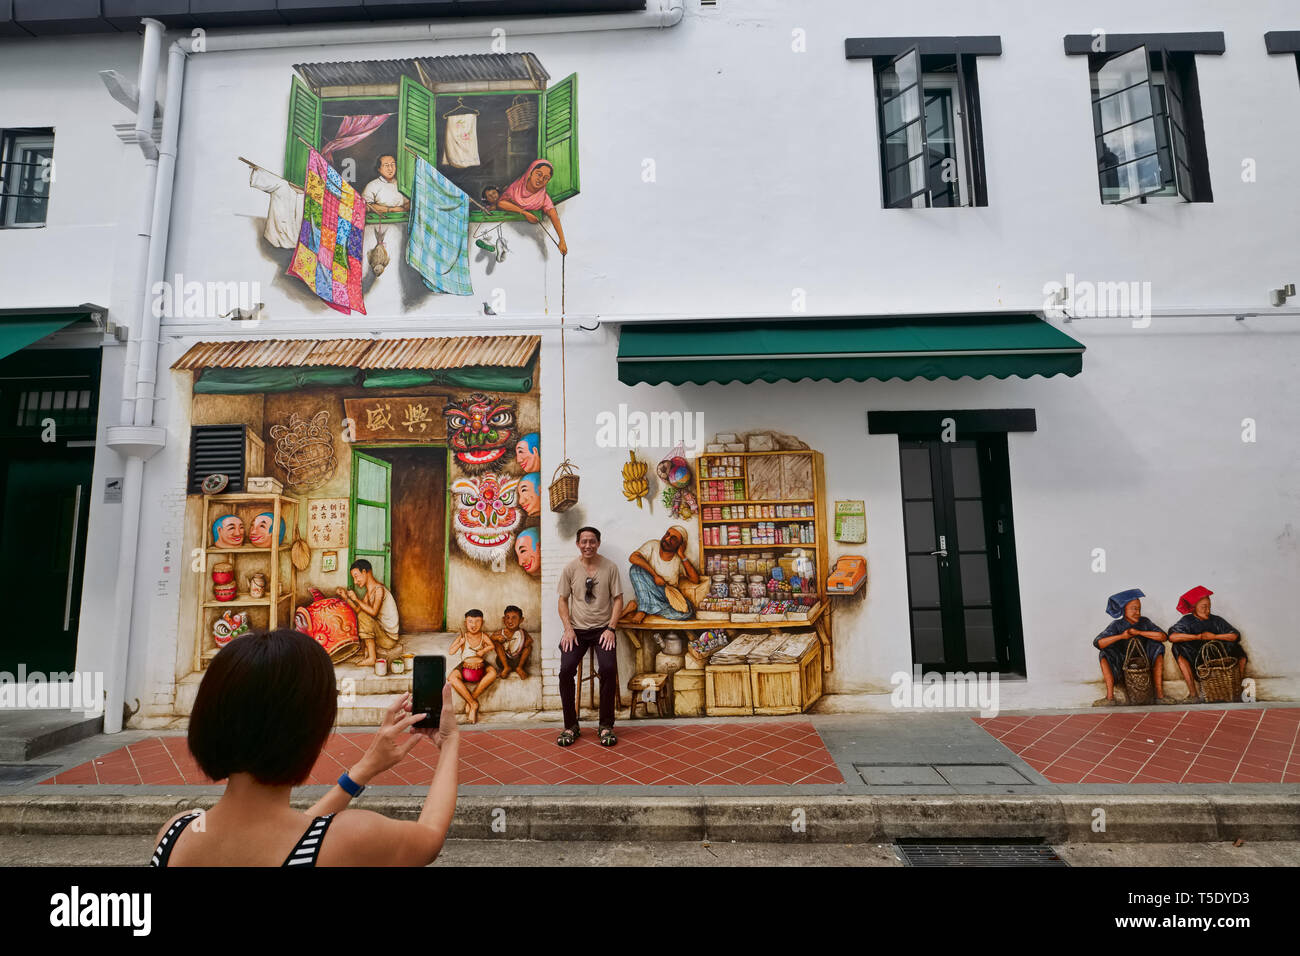 Tourists taking photos at a wall painting by Yip Yew Chong in Mohamed Ali Lane, Chinatown, Singapore, depicting local scenes of decades gone by Stock Photo